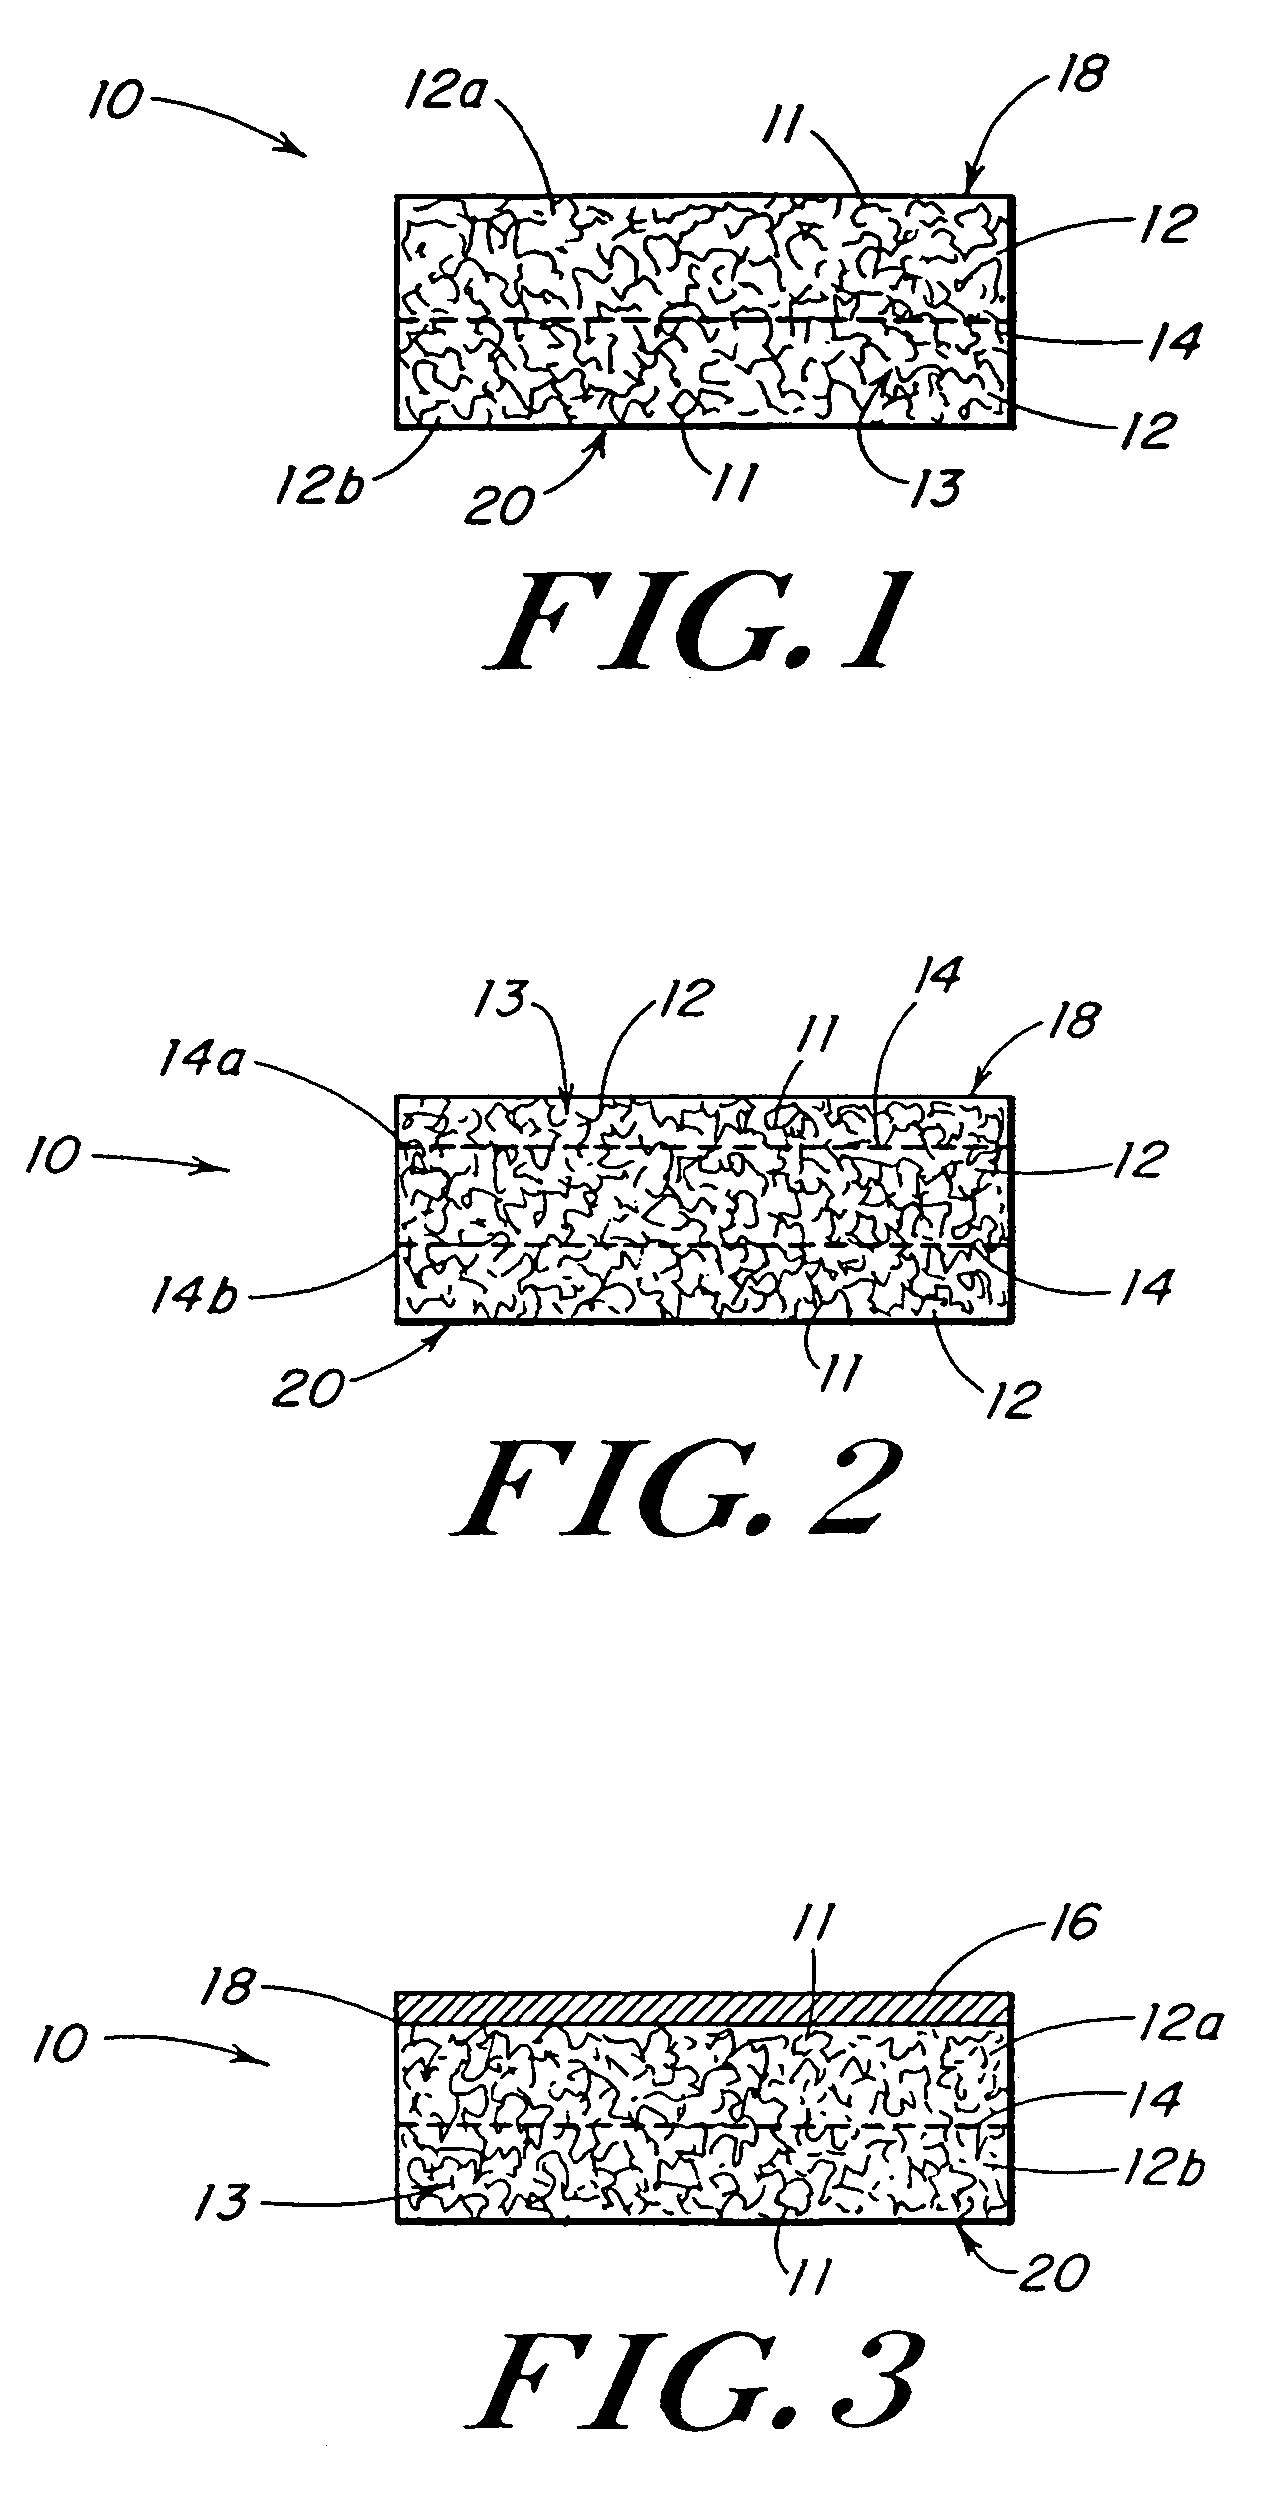 Reinforced foam implants with enhanced integrity for soft tissue repair and regeneration